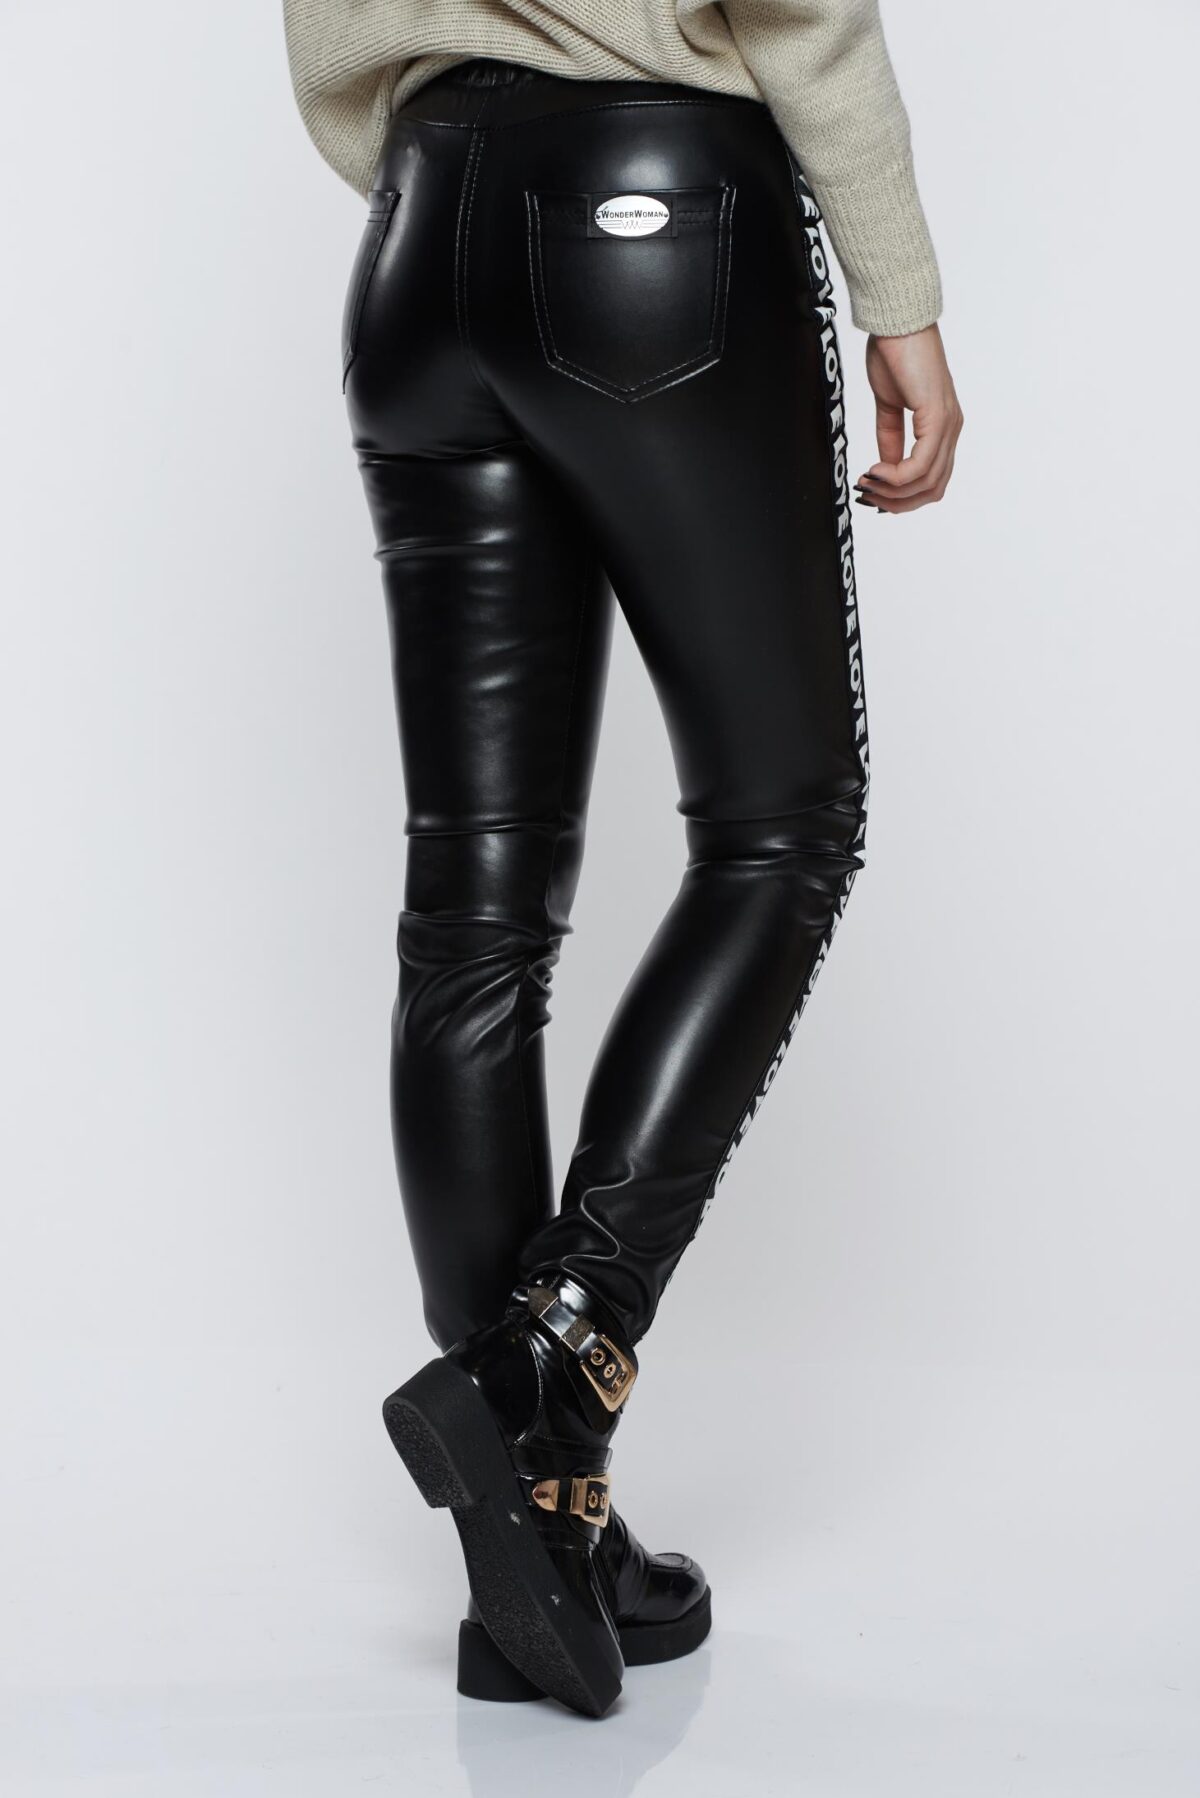 Black Trousers Casual With Medium Waist Of Ecological Leather